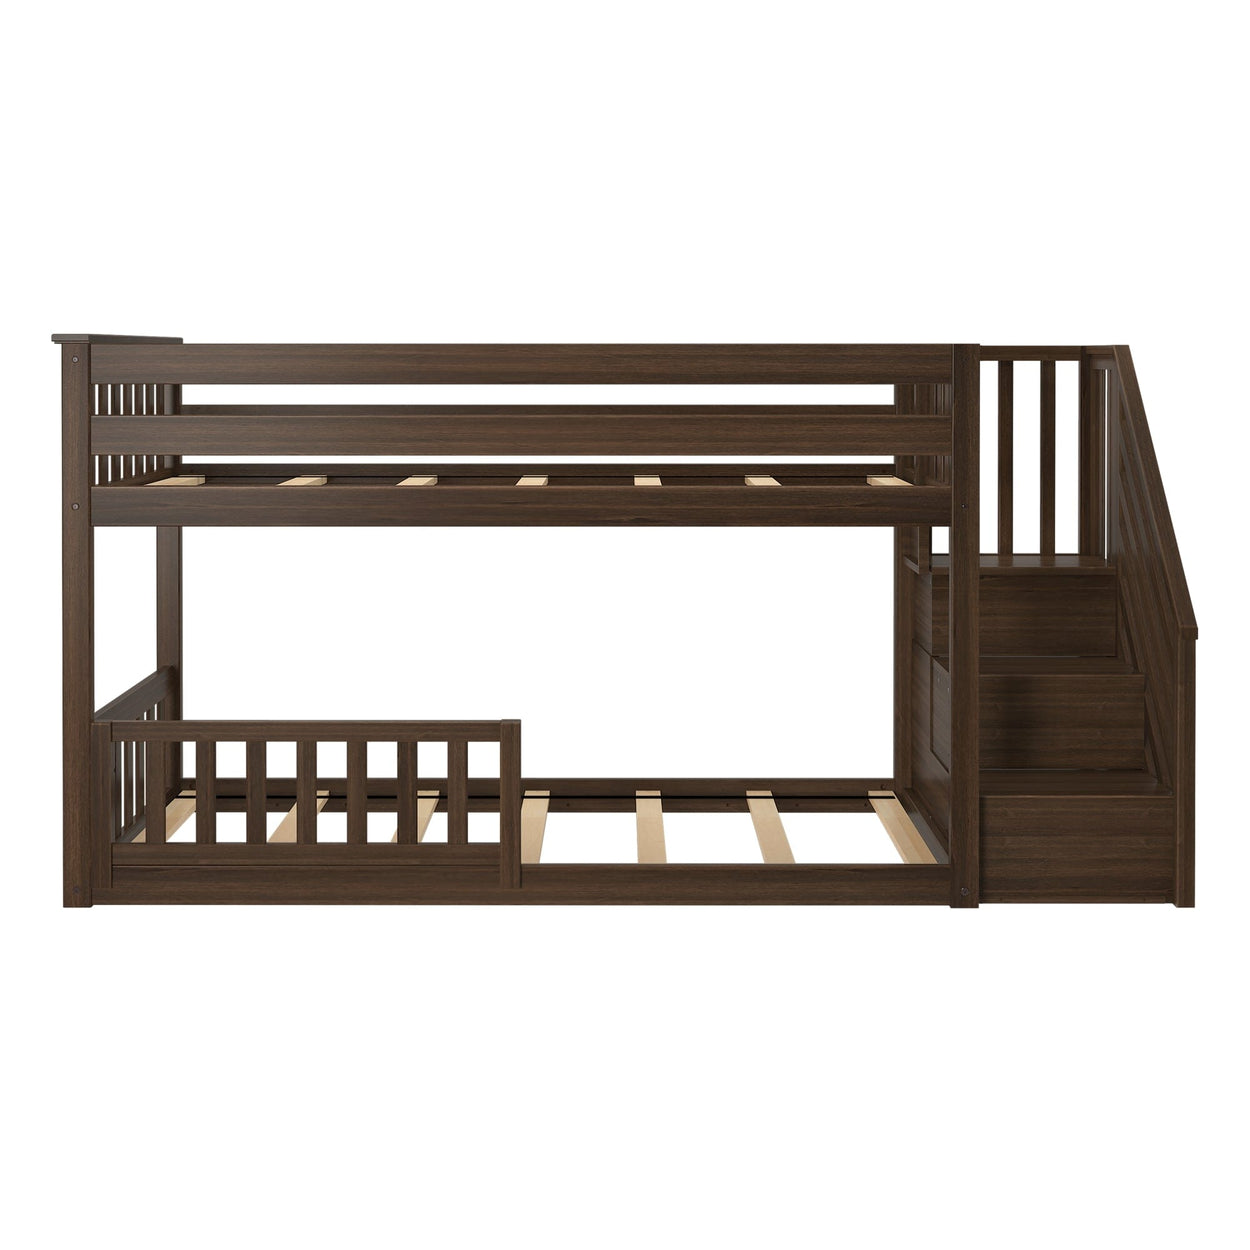 185220008109 : Bunk Beds Low Bunk with Stairs and Single Guard Rail, Walnut